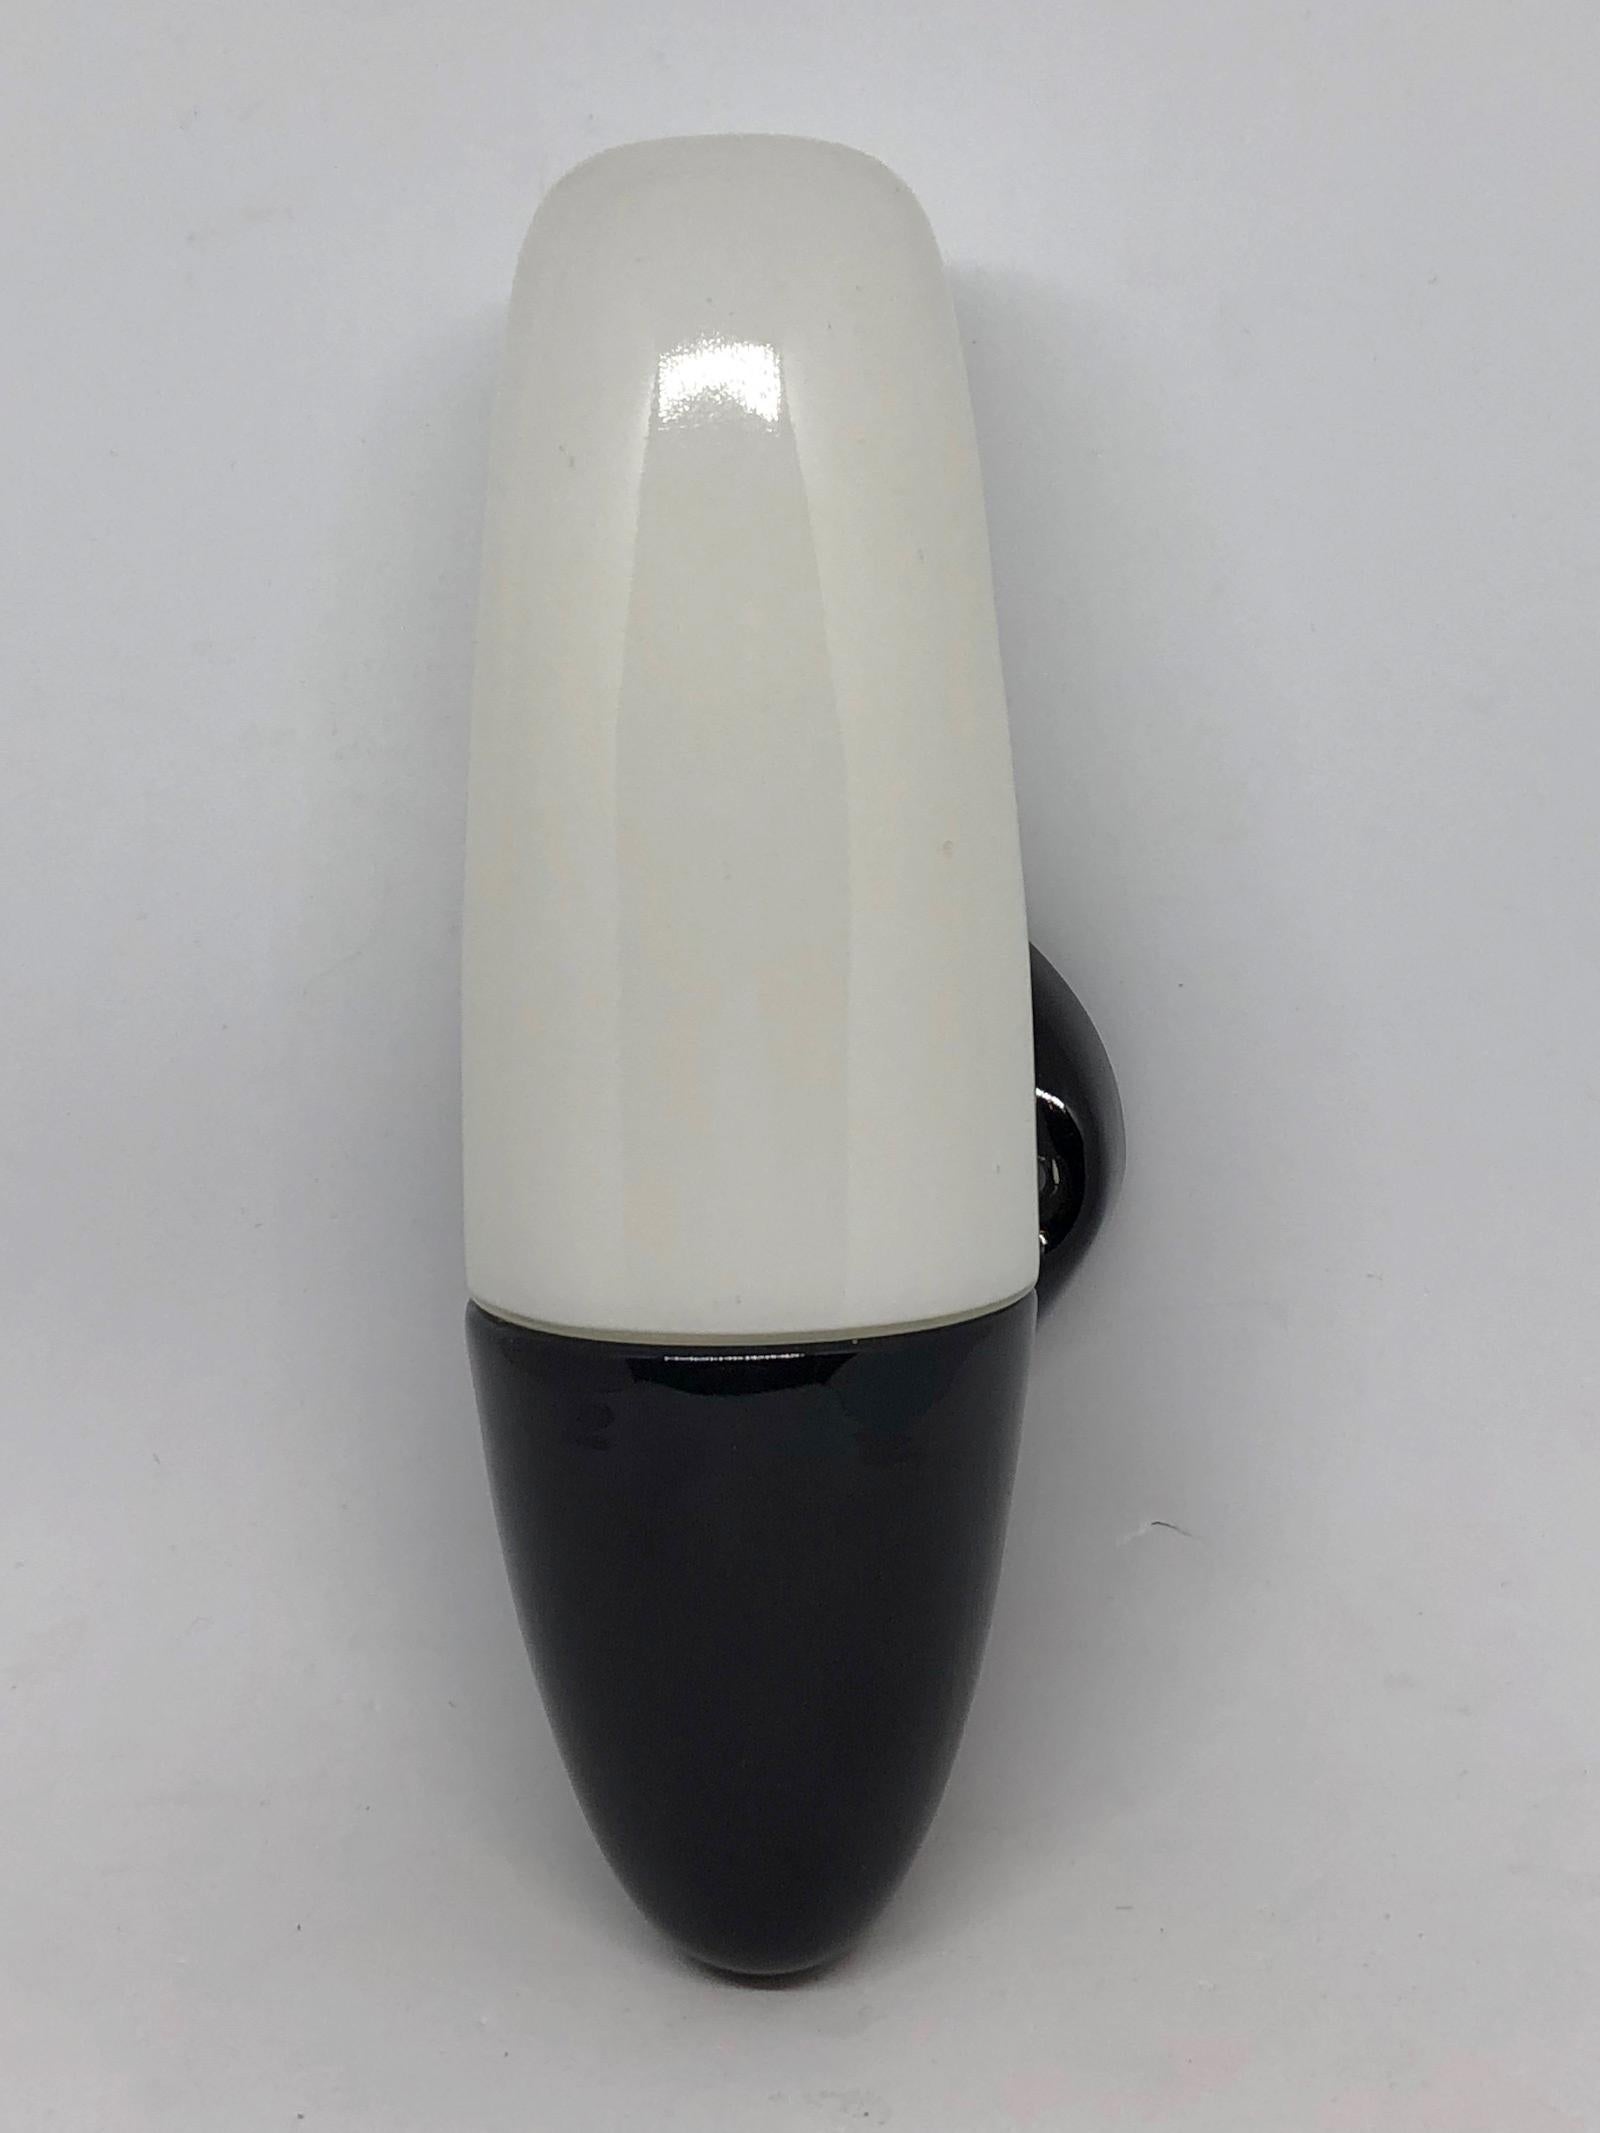 Porcelain Bauhaus Wagenfeld Black and White Wall Sconce, Germany, 1950s For Sale